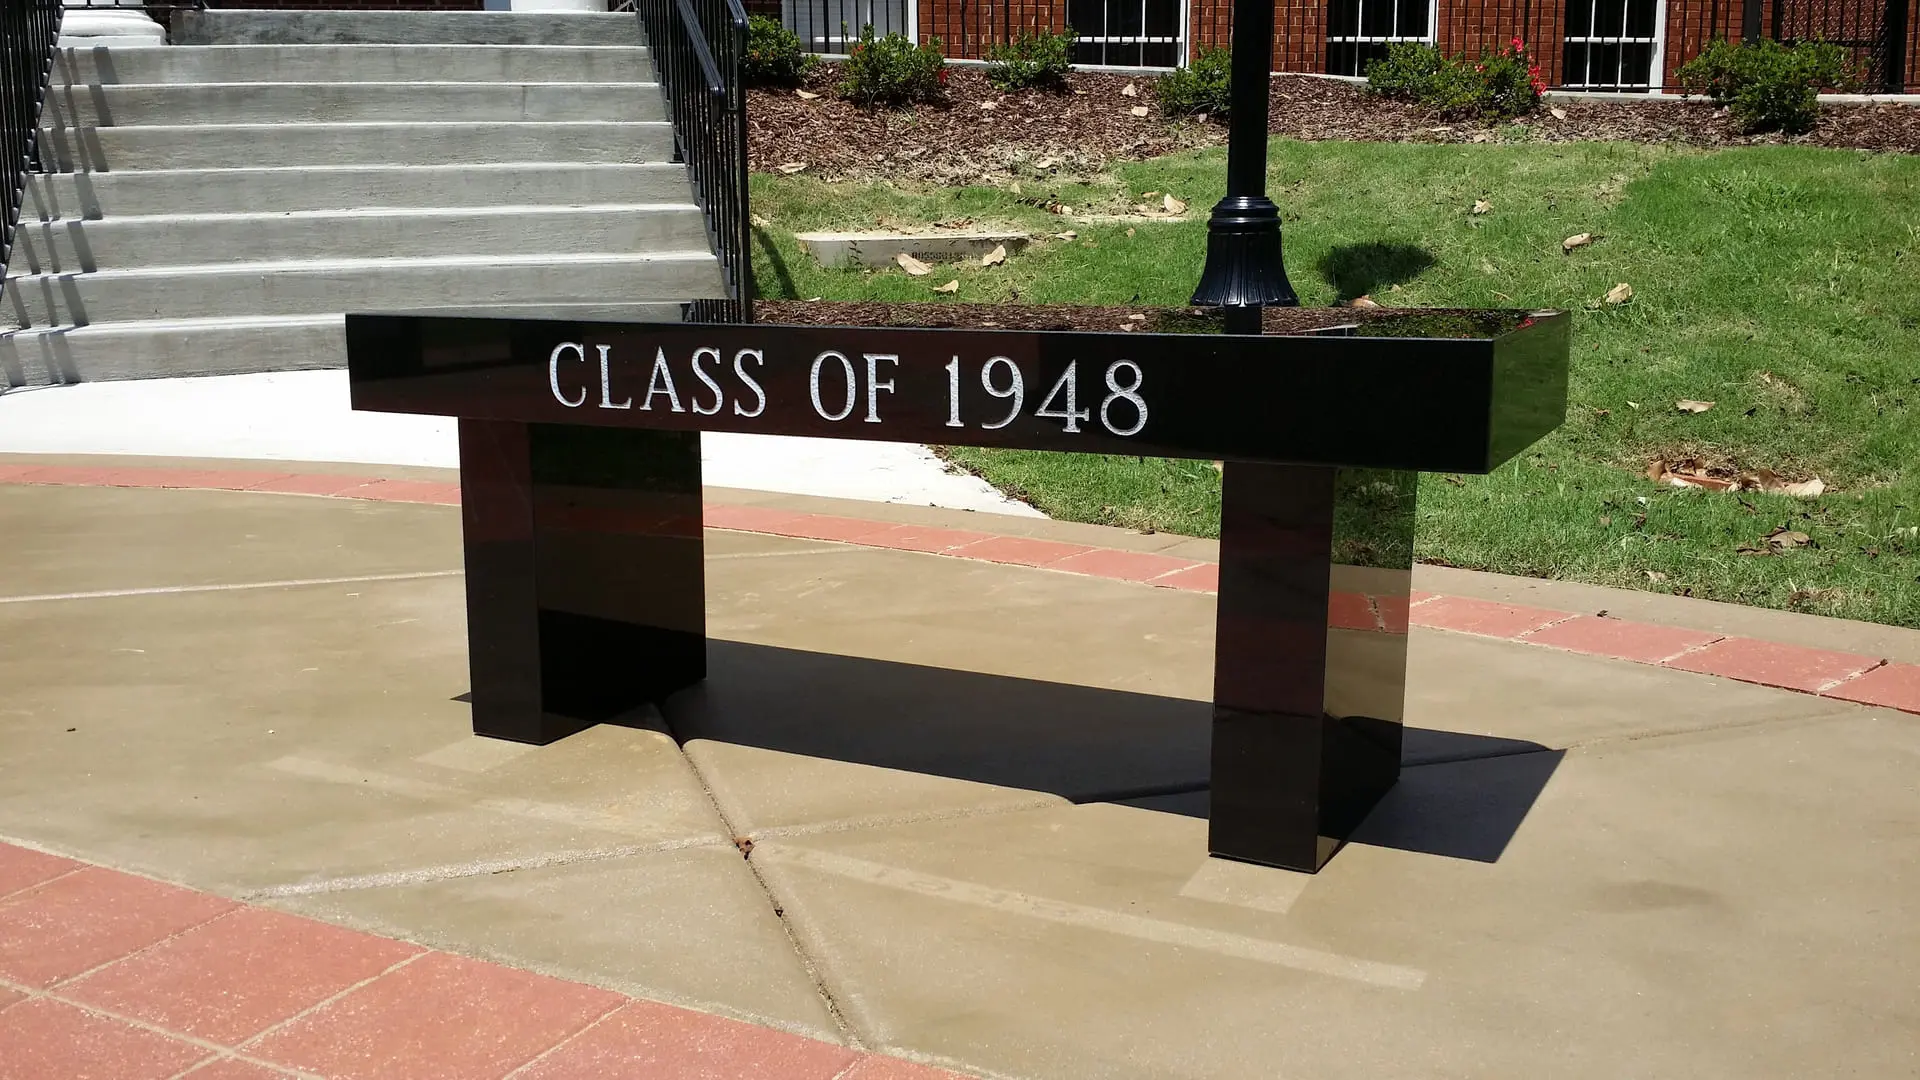 A beautiful Bench named after the class of 1948